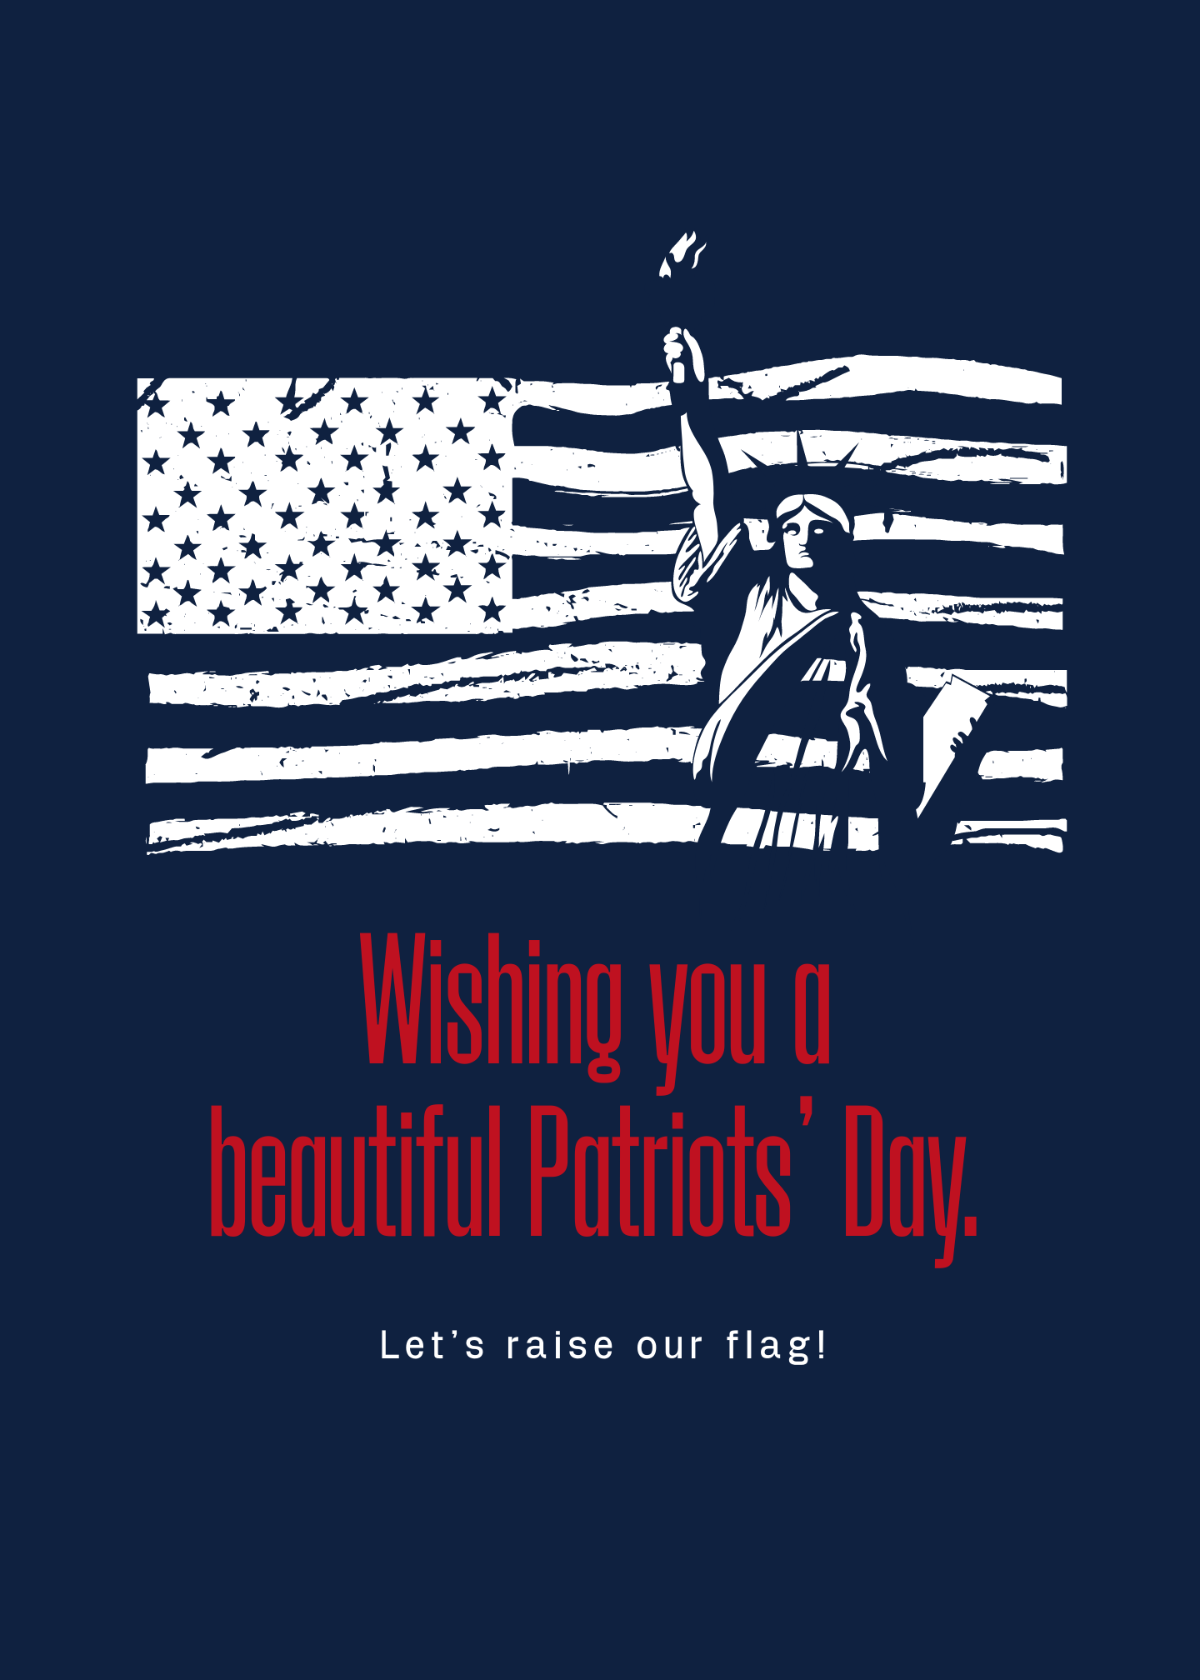 Patriots' Day Wishes Template